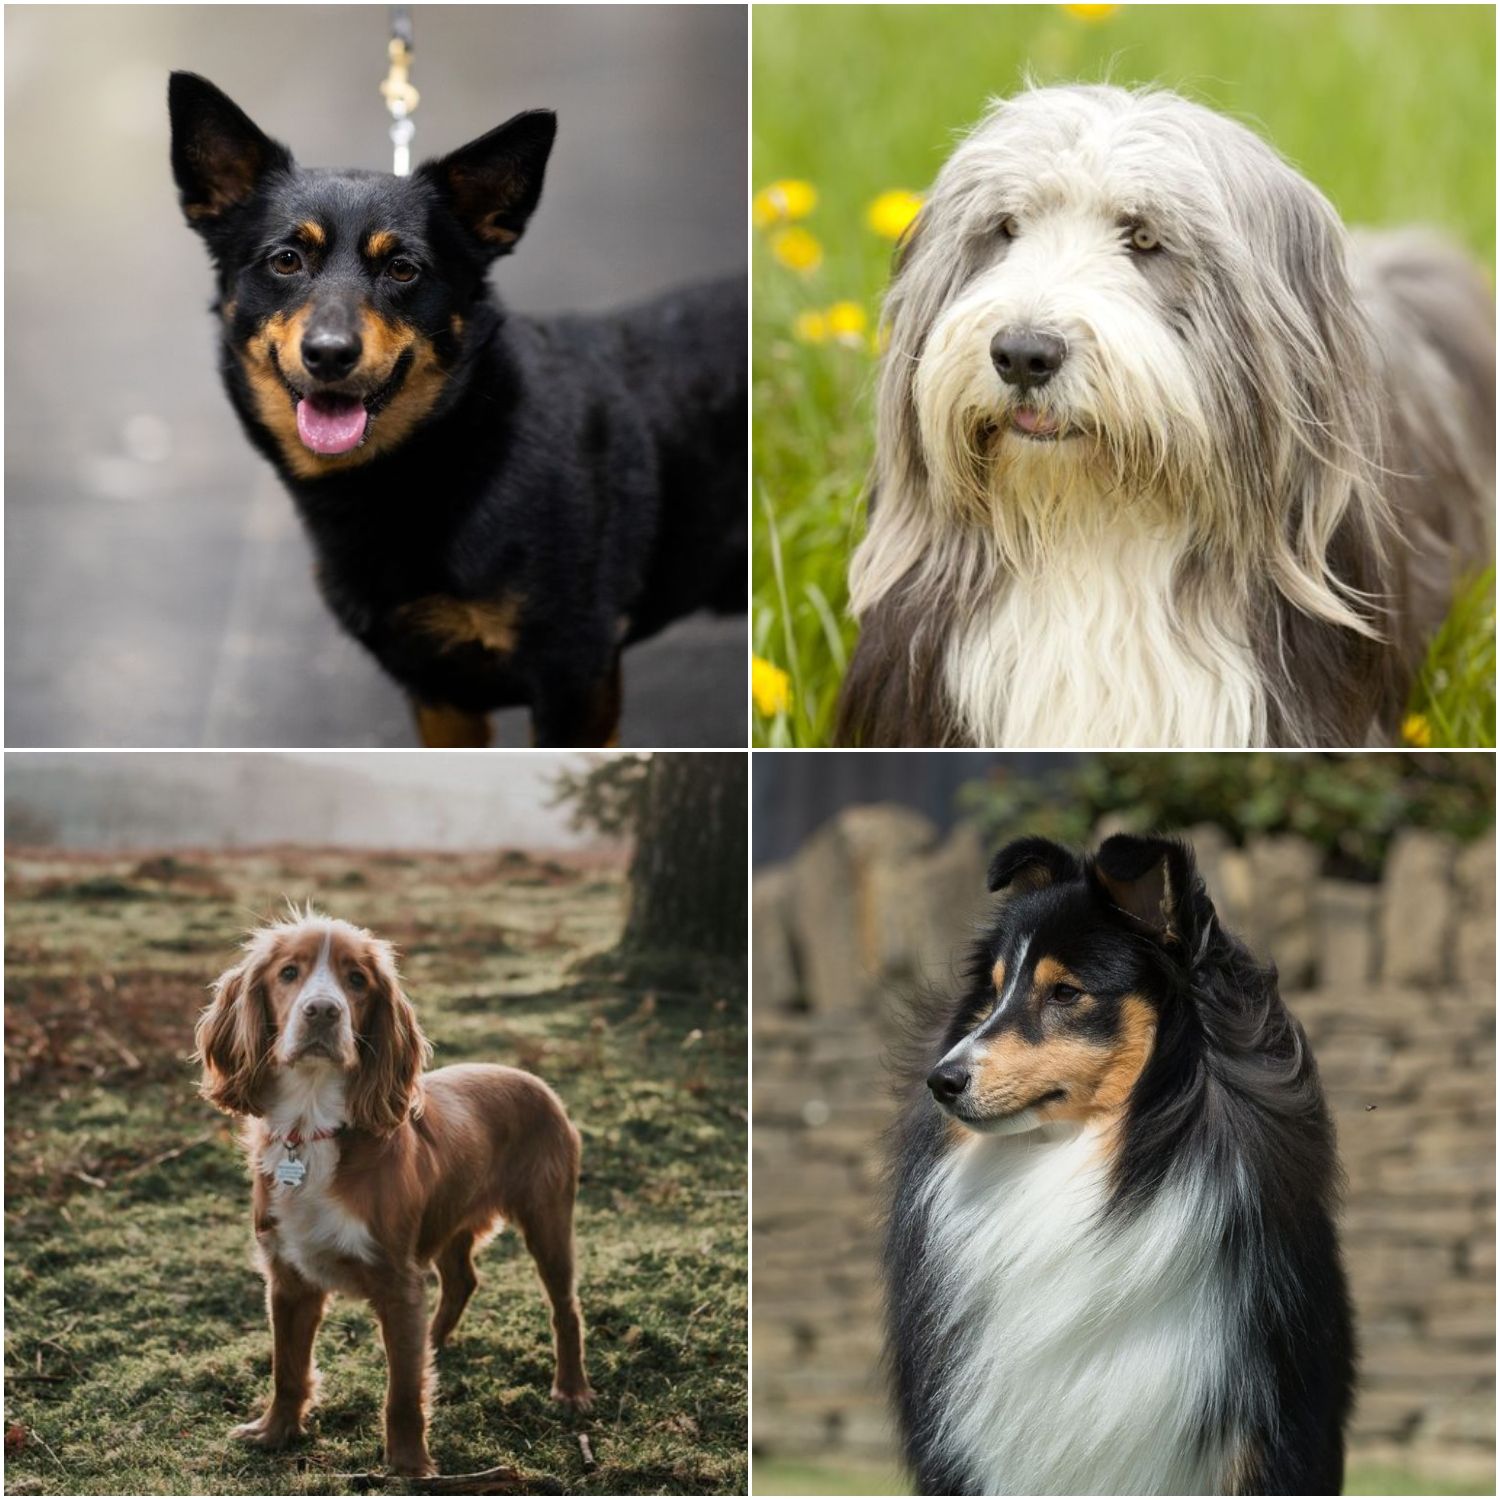 6 versatile dog breeds that make the best all rounder companions